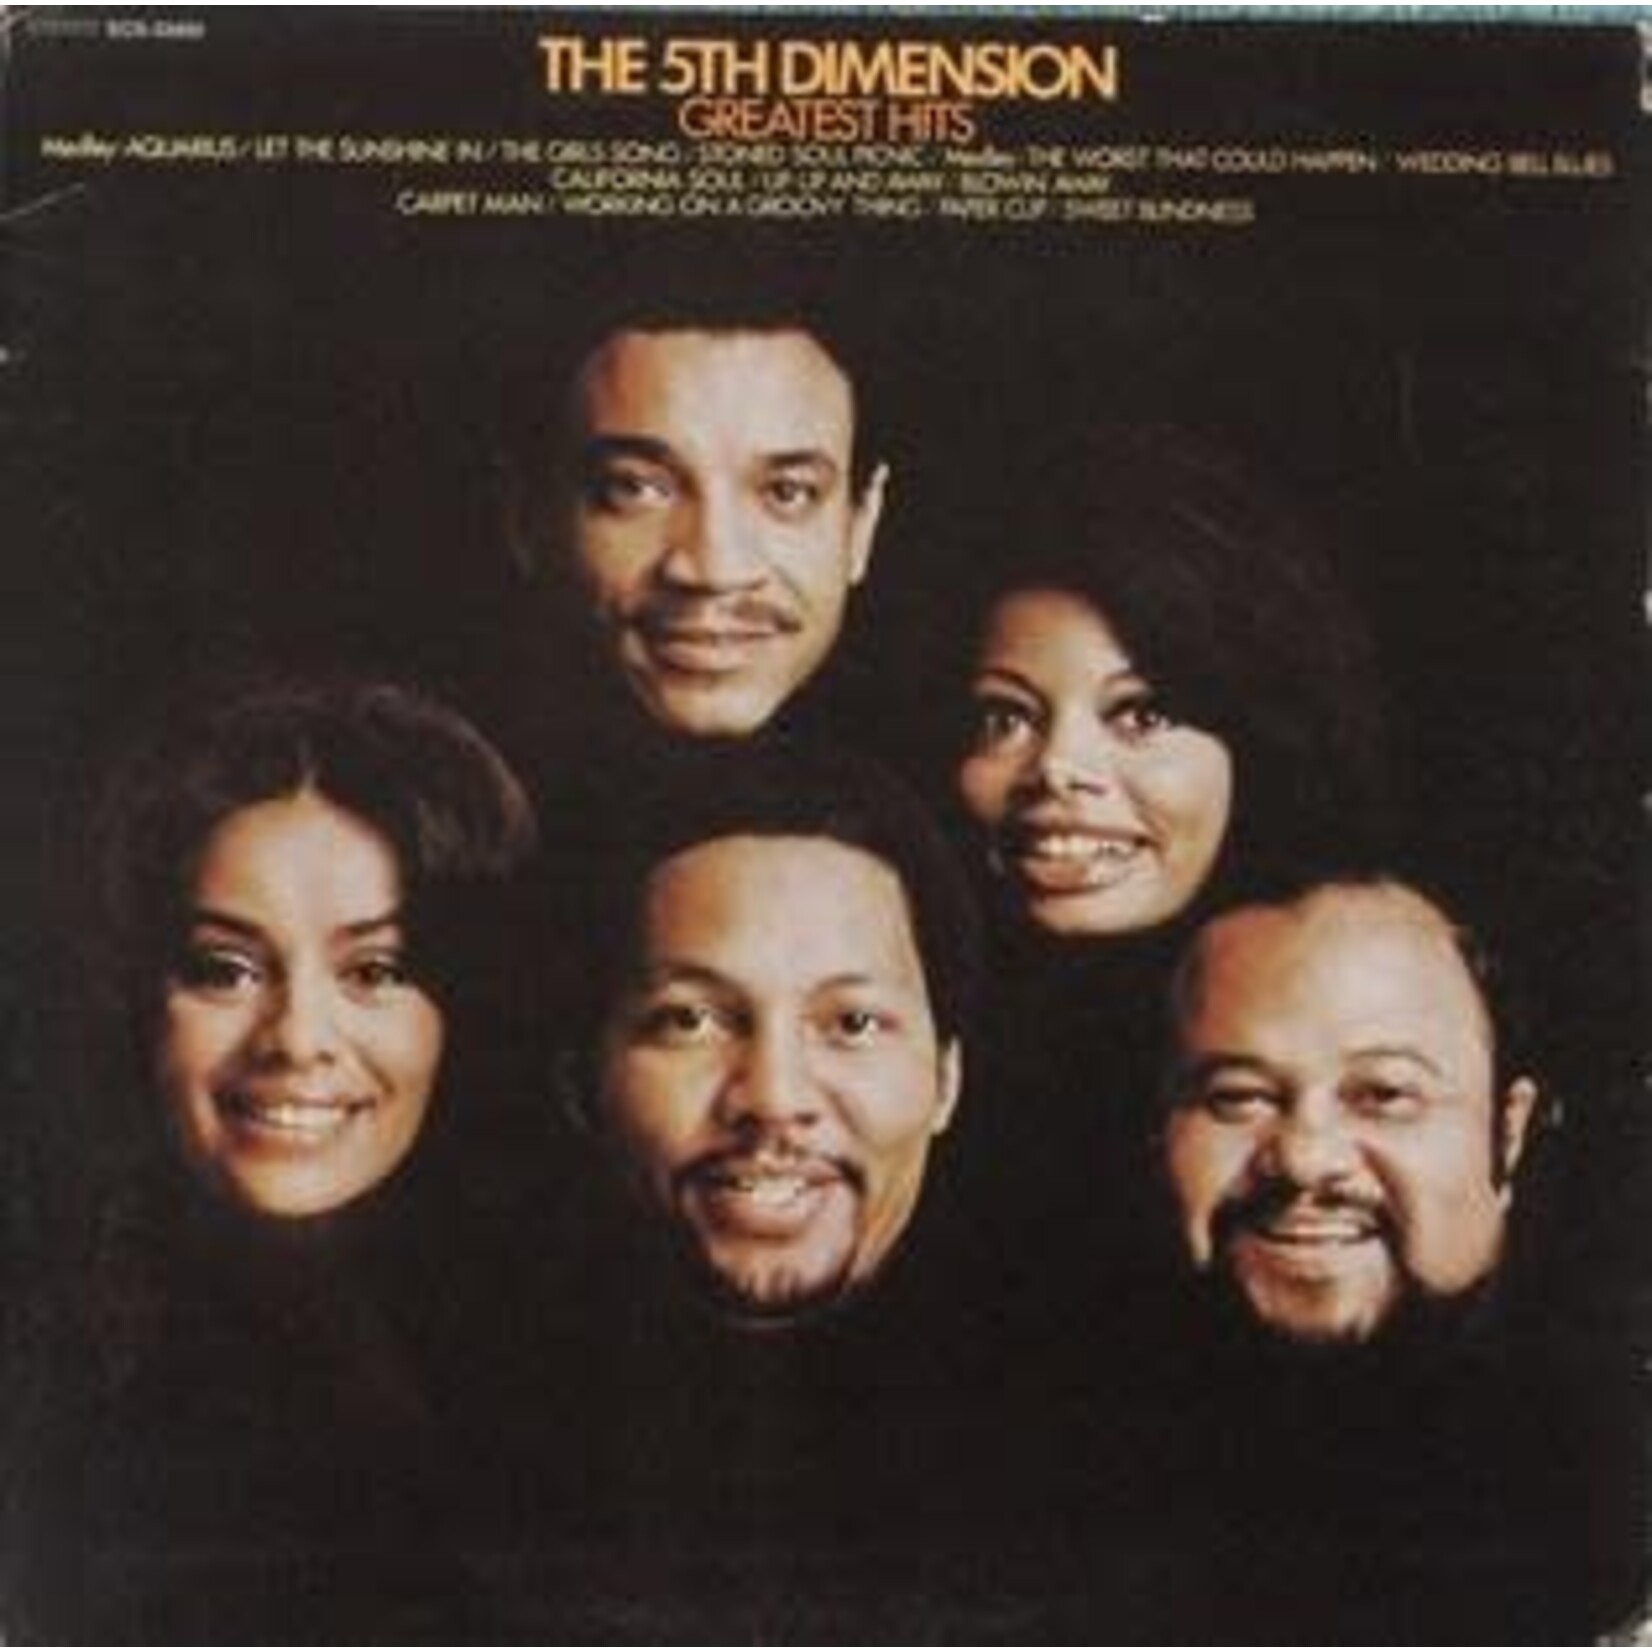 [Vintage] 5th Dimension - Greatest Hits